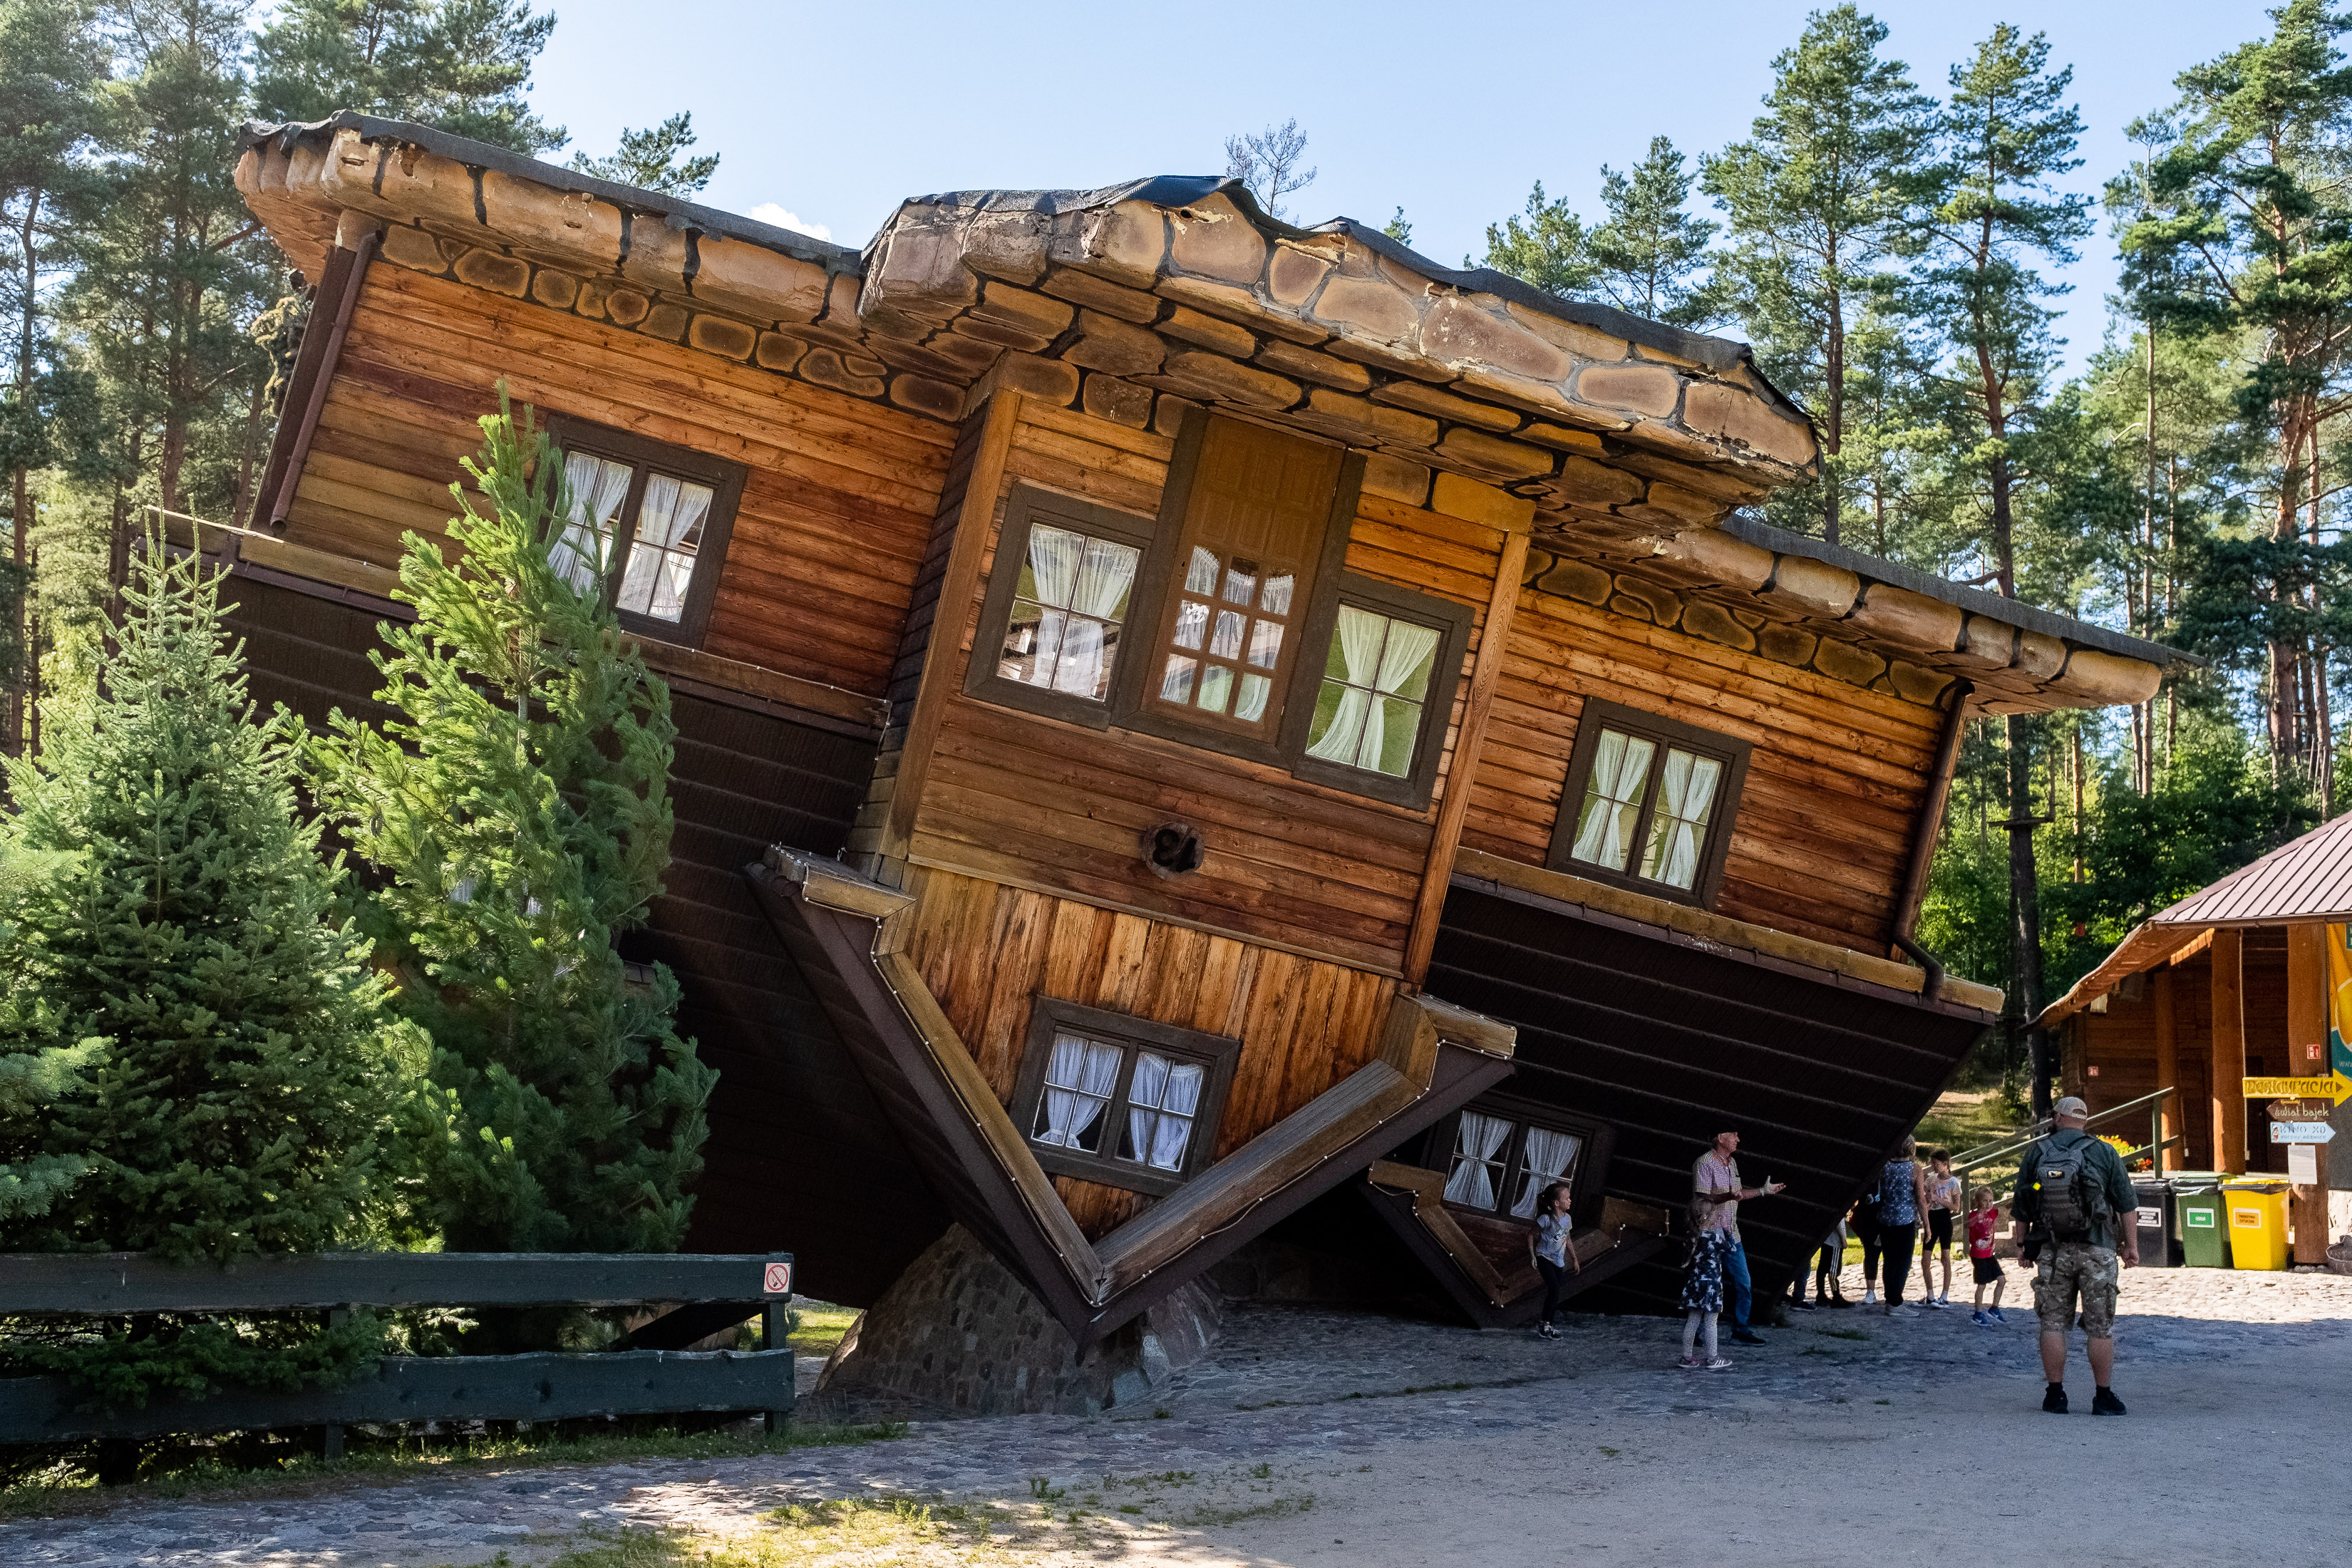 The Upside Down House — Szymbark, Poland | Source: Getty Images